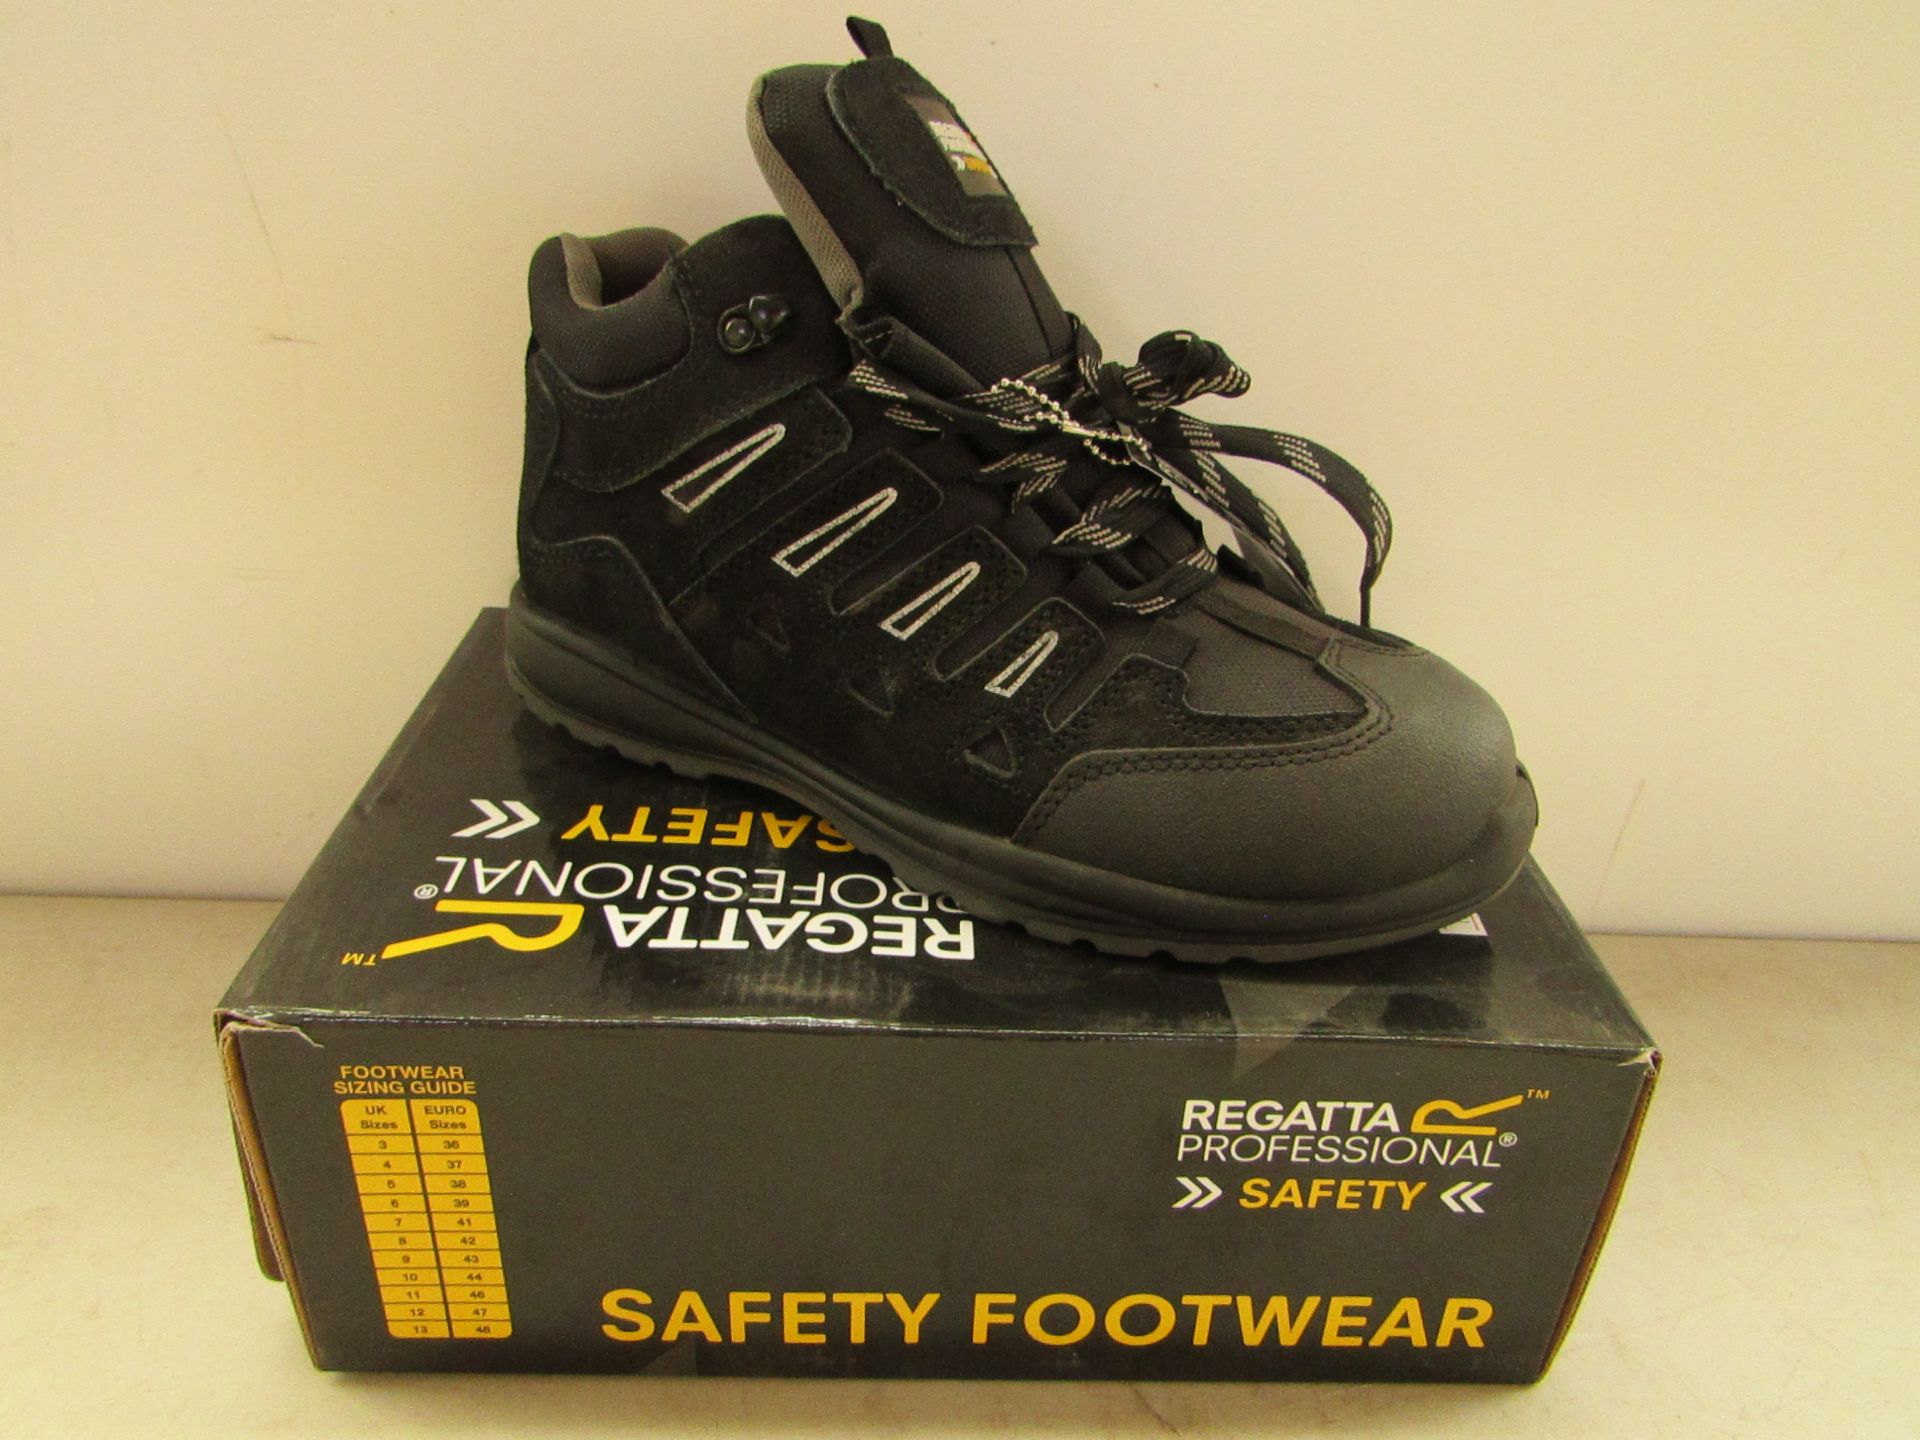 Regatta Professional Loader steel toe cap safety hikers, size UK8, RRP £59.99 new and boxed.